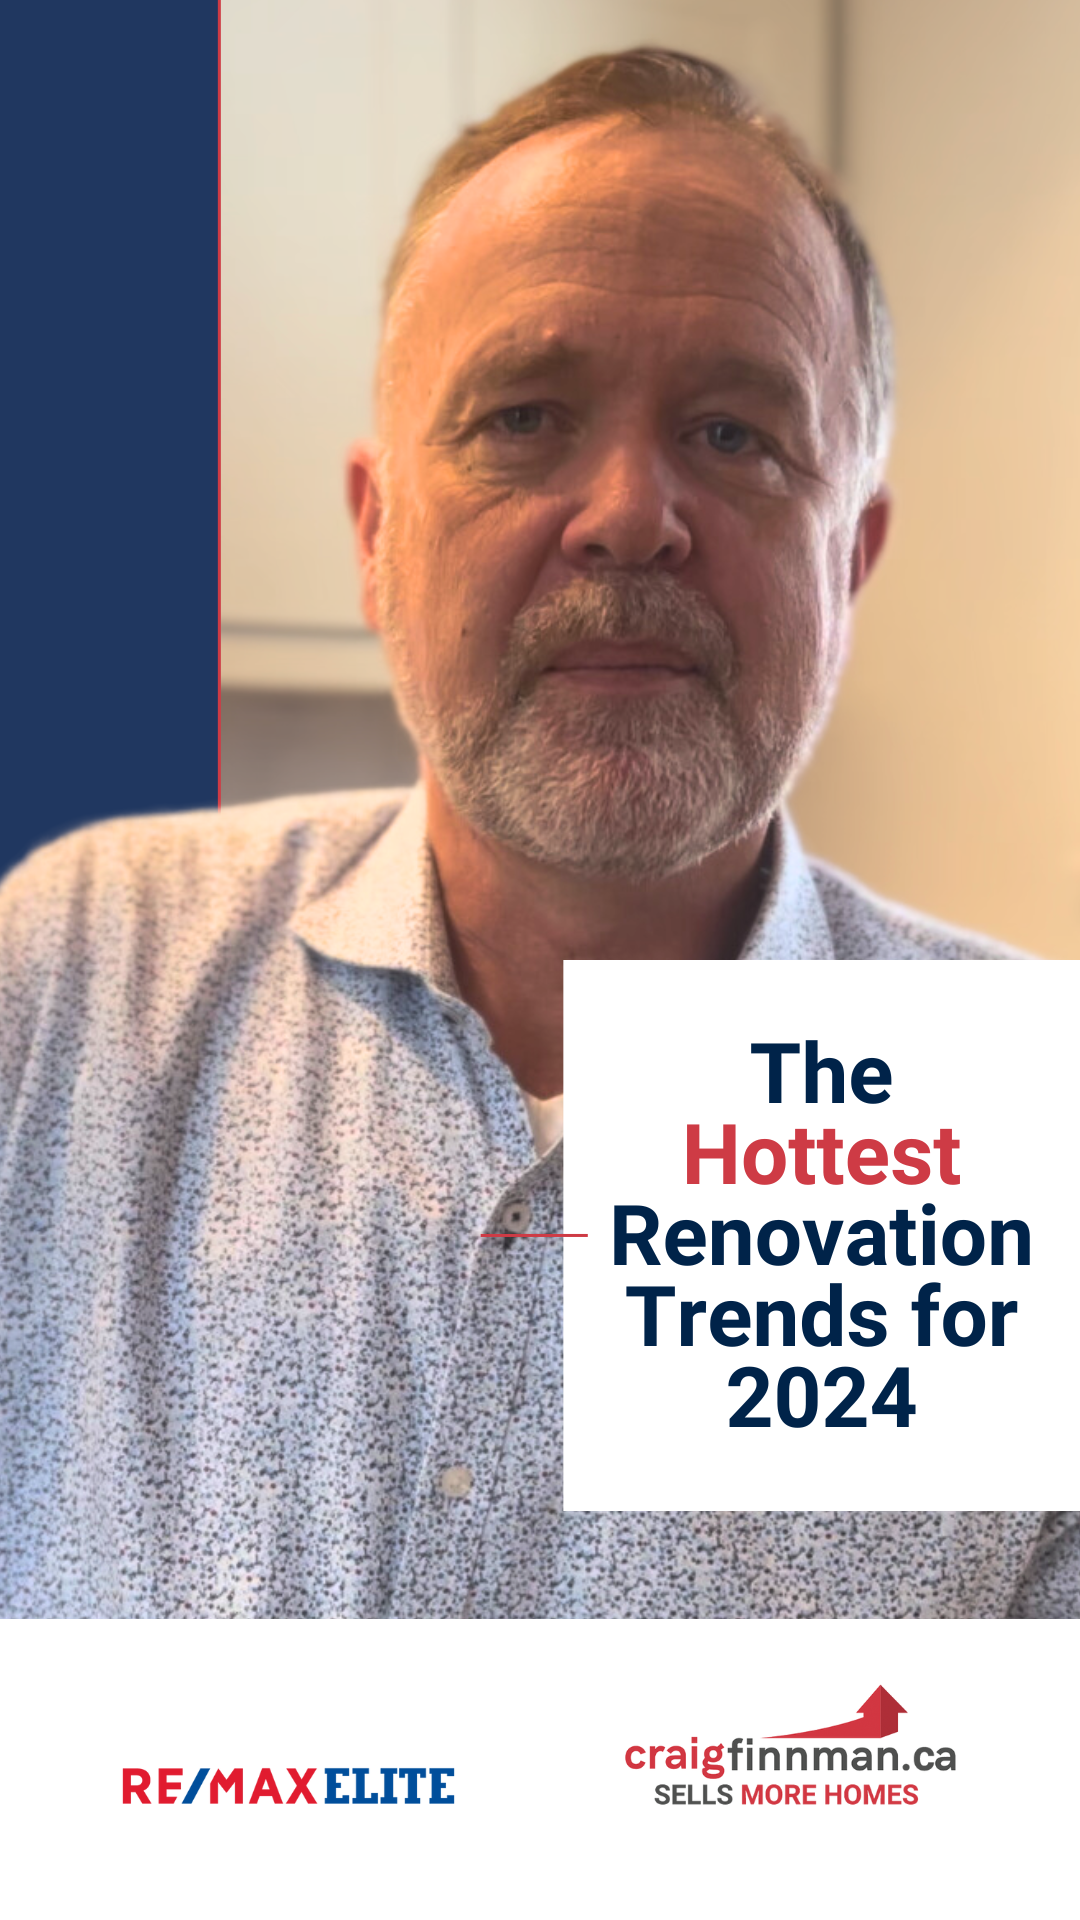 The Hottest Renovation Trends for 2024